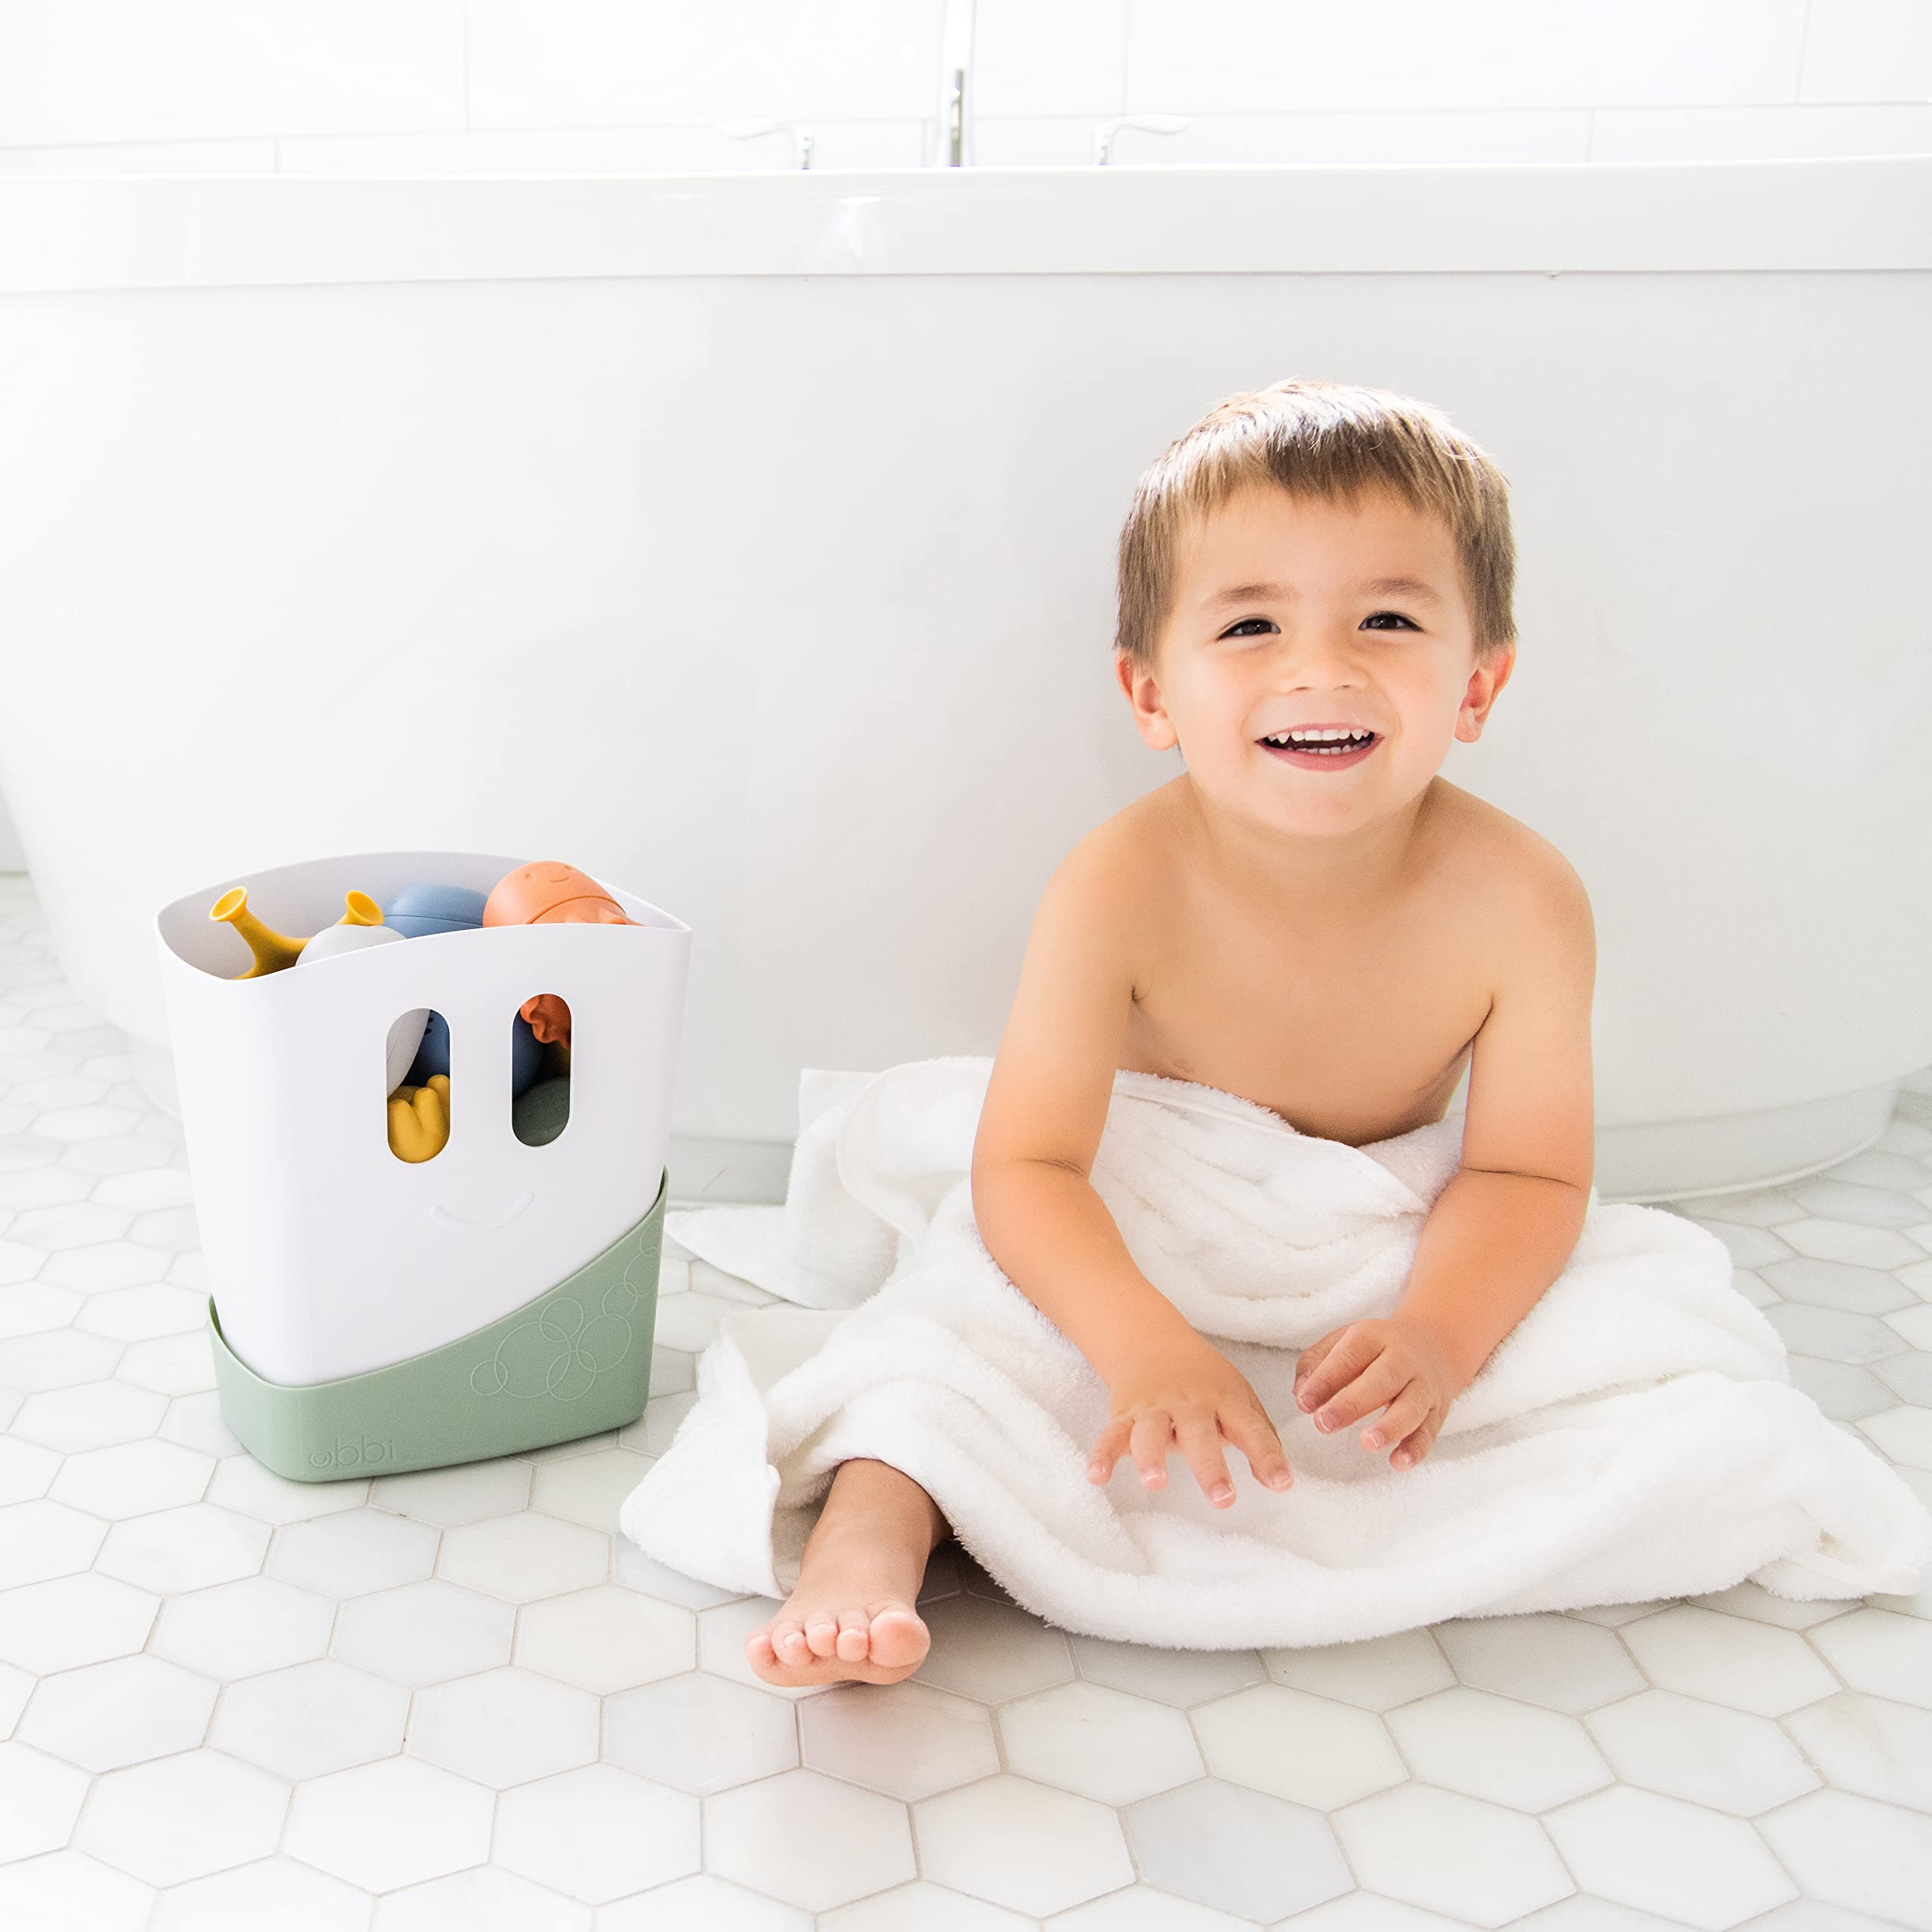 Ubbi Freestanding Bath Toy Organizer Bath Caddy with Removable Drying Rack Bin & Scoop for Toddlers + Baby, Sage